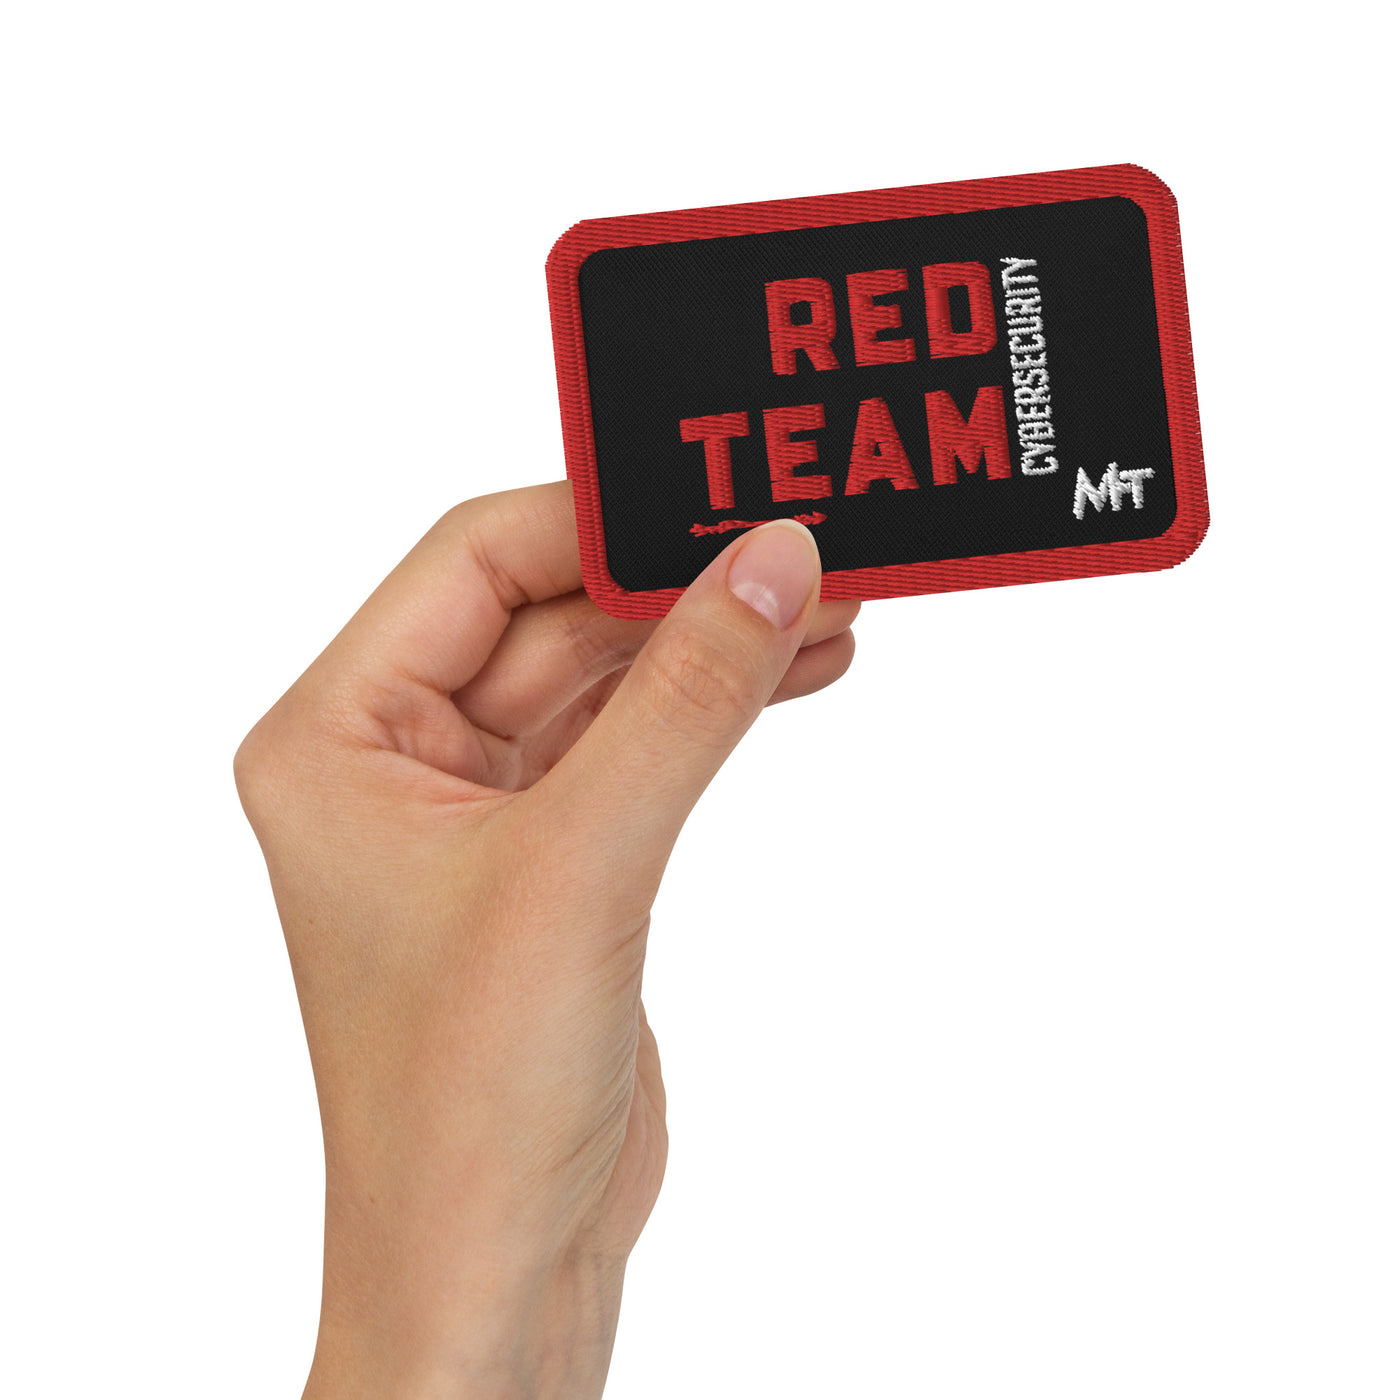 Cyber Security Red Team V8 - Embroidered patches